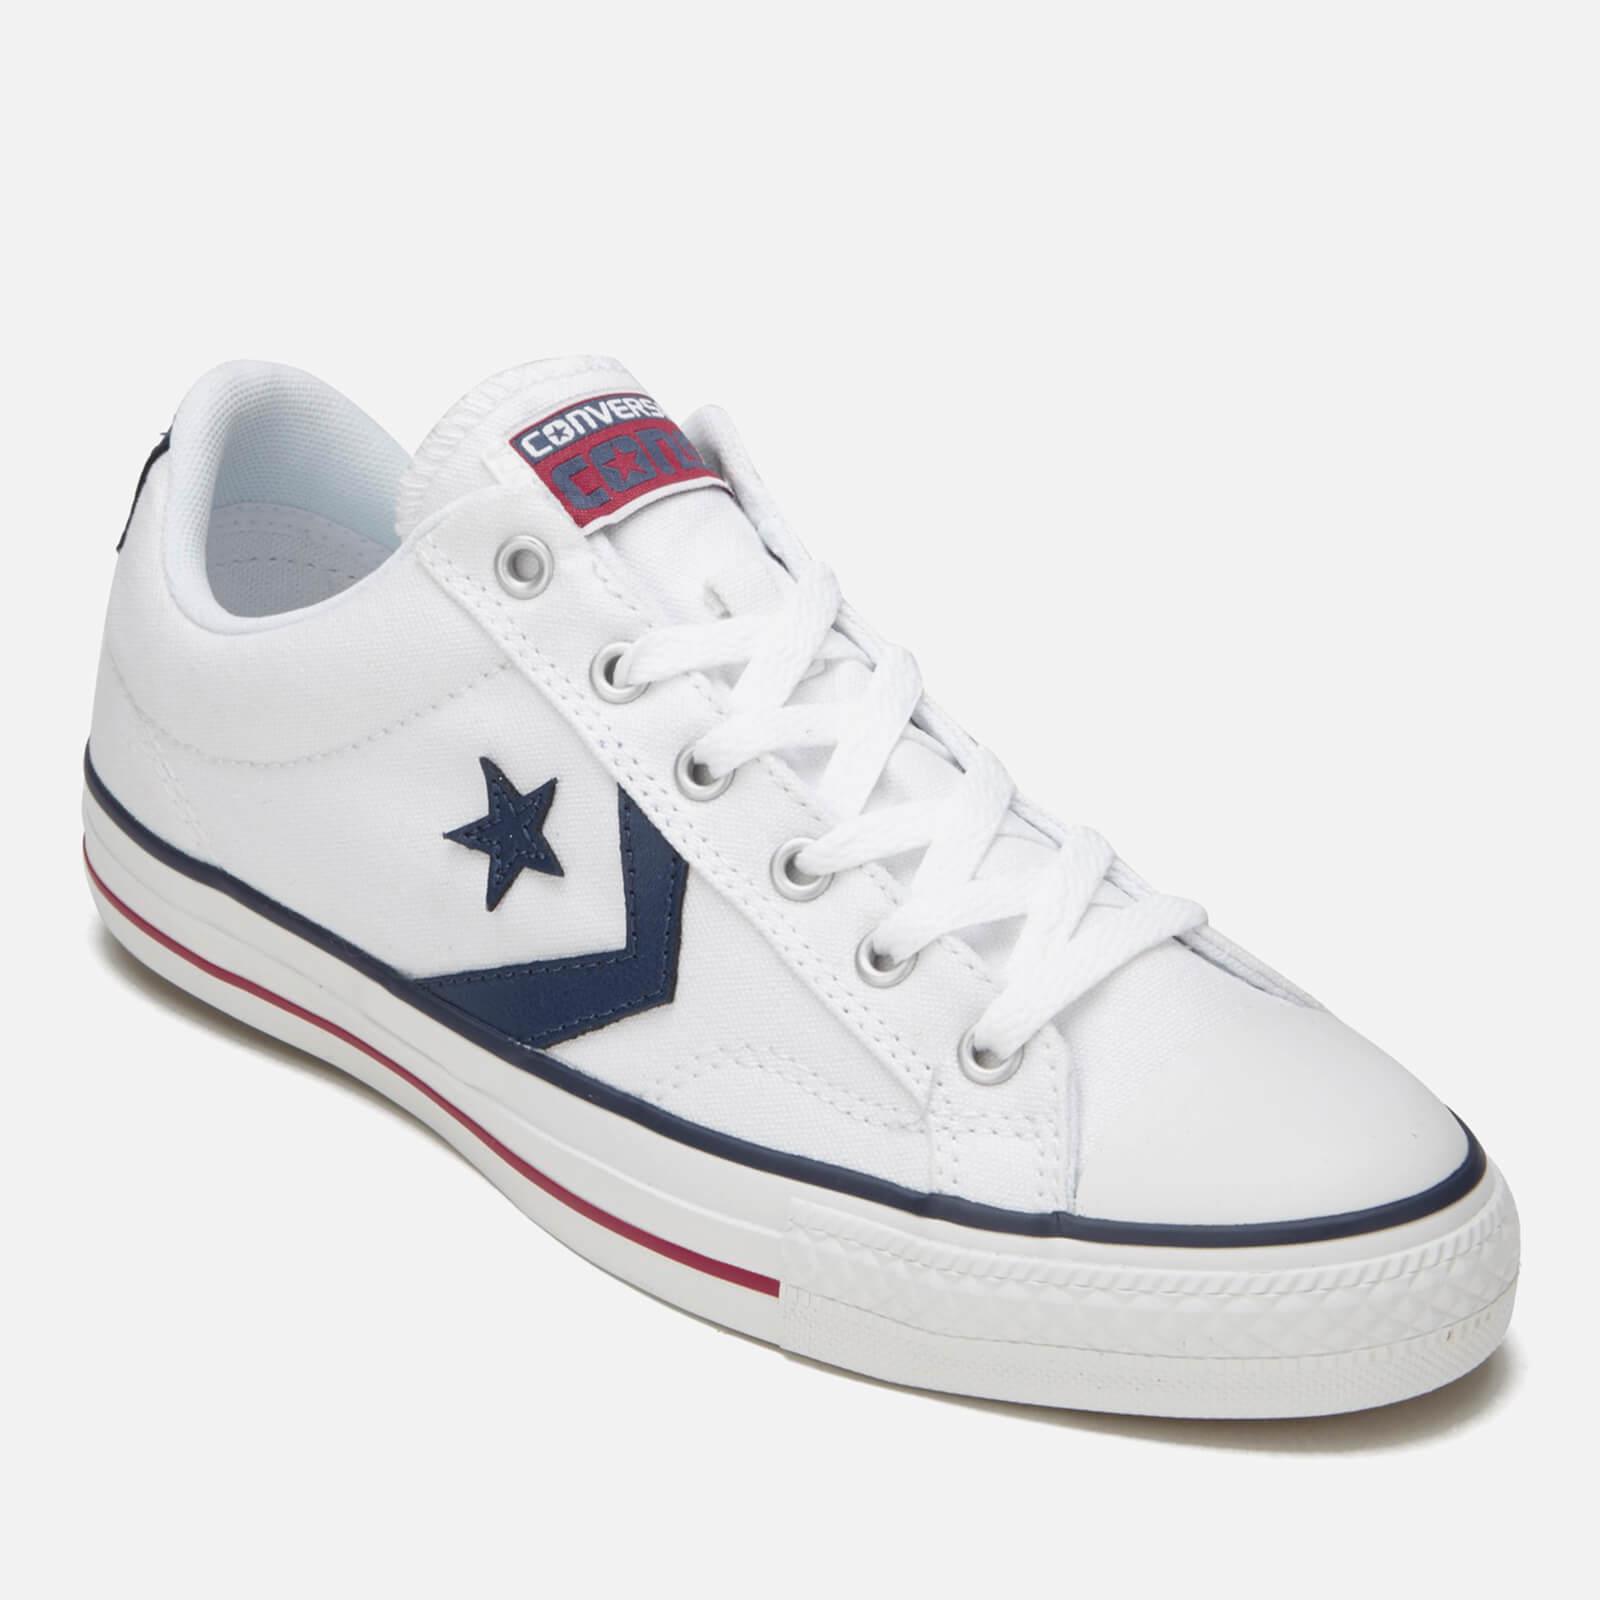 Converse Cons Men's Star Player Canvas Trainers in White/White/Navy (White)  - Lyst